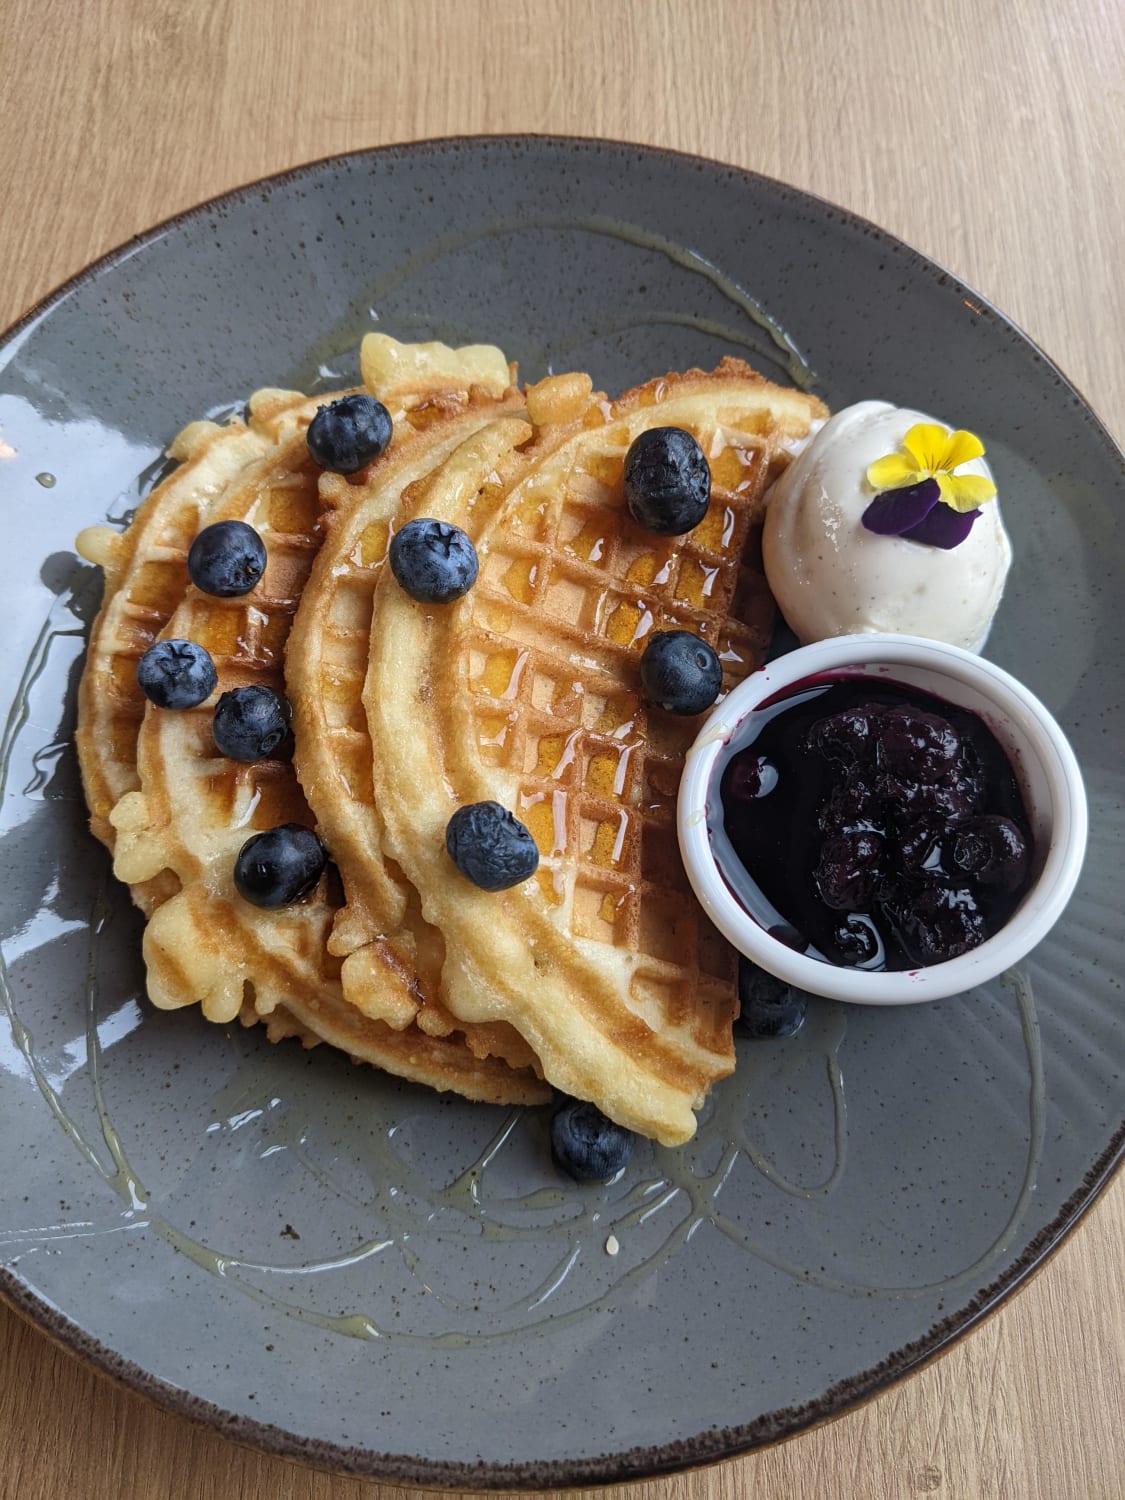 [I ate] Blueberry and maple syrup waffles